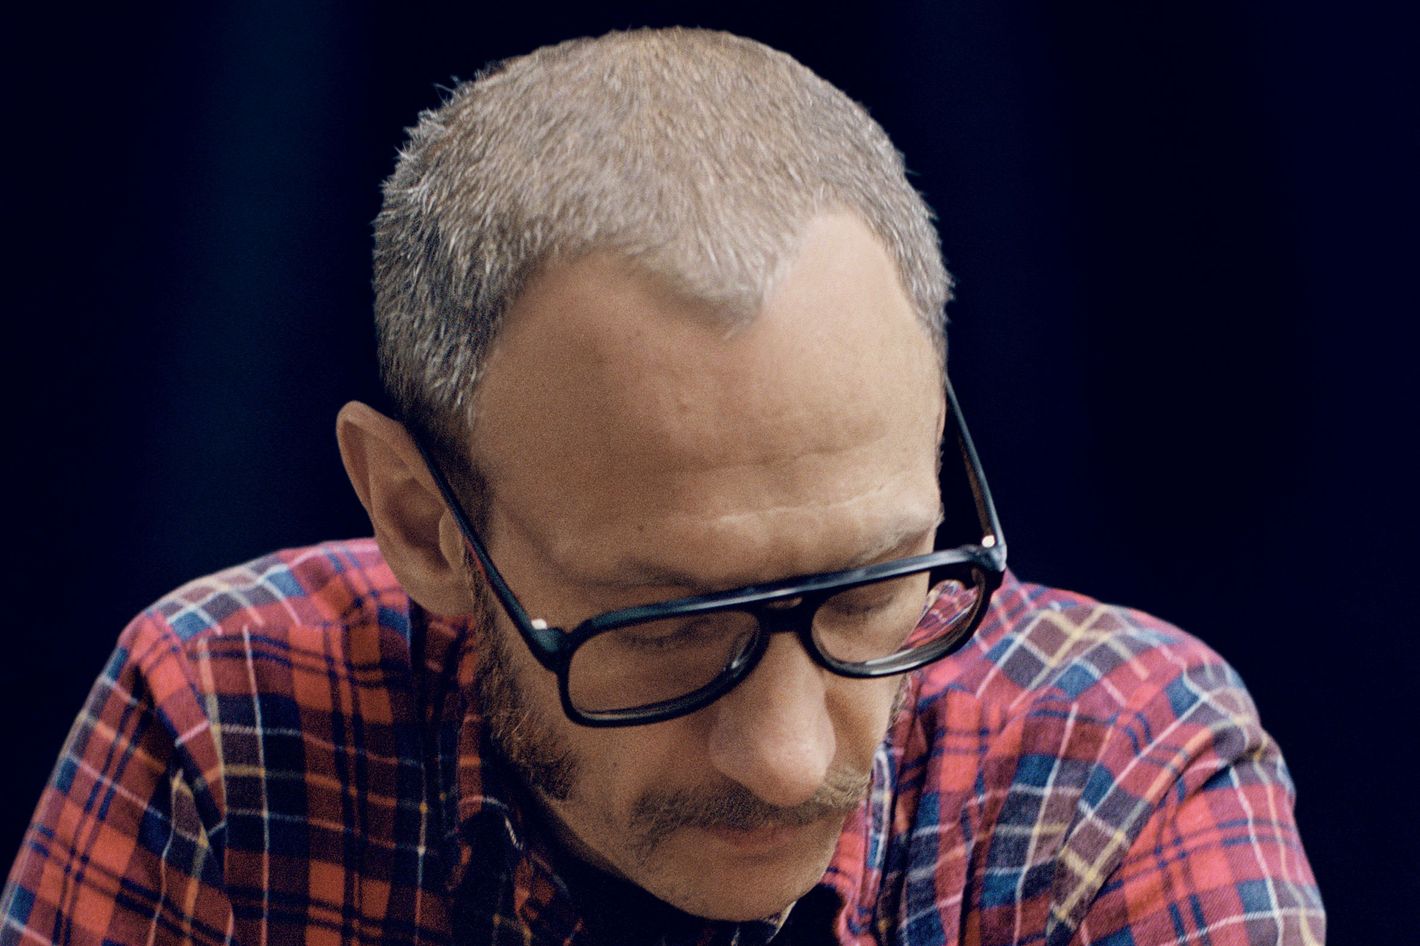 Is Terry Richardson an Artist or a Predator? image